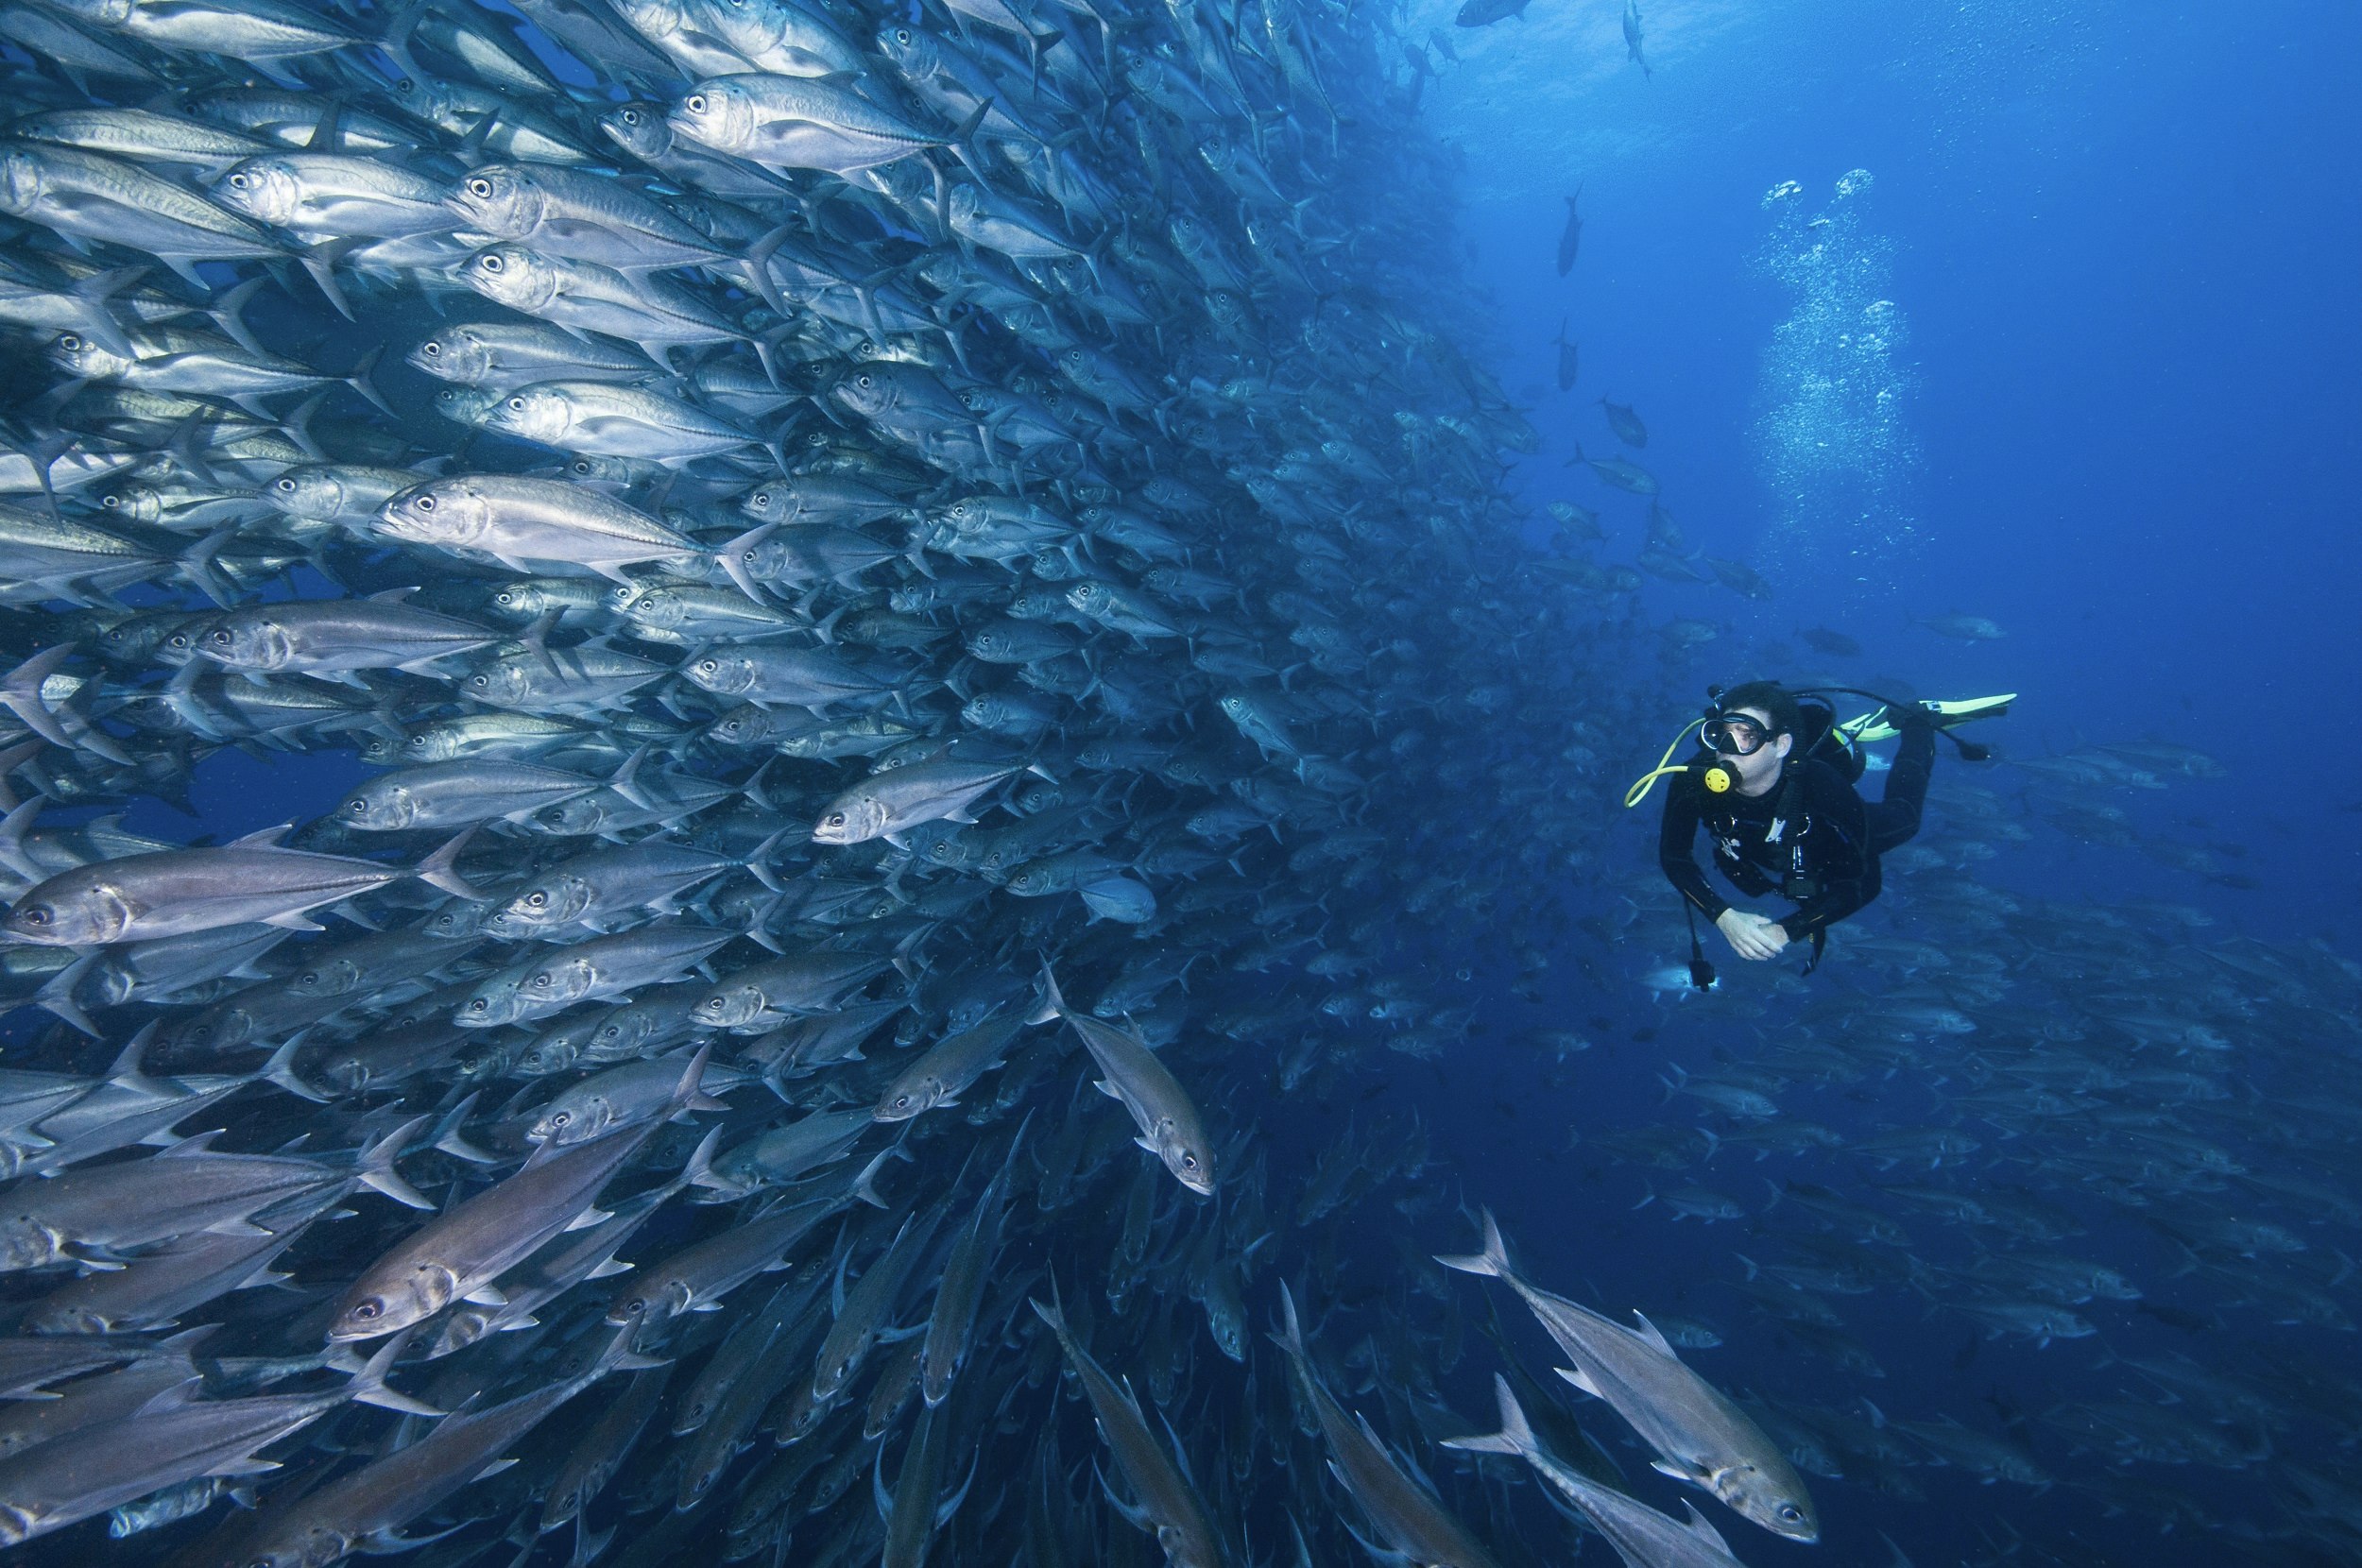 A scuba diver swimming past a wall of jacks (silver fish) within deep blue waters